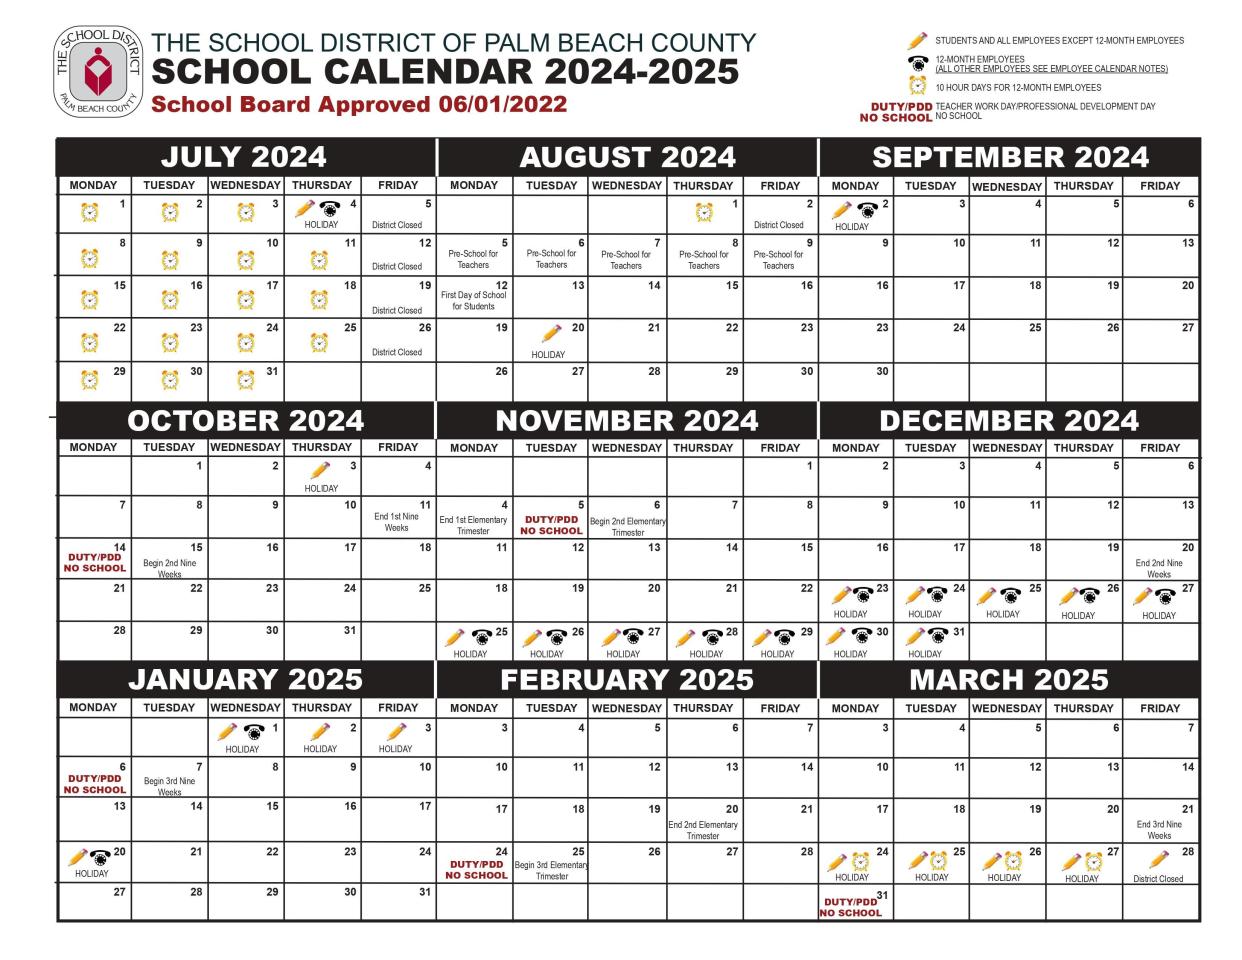 The calendar for Palm Beach County schools for the 2024-25 school year.